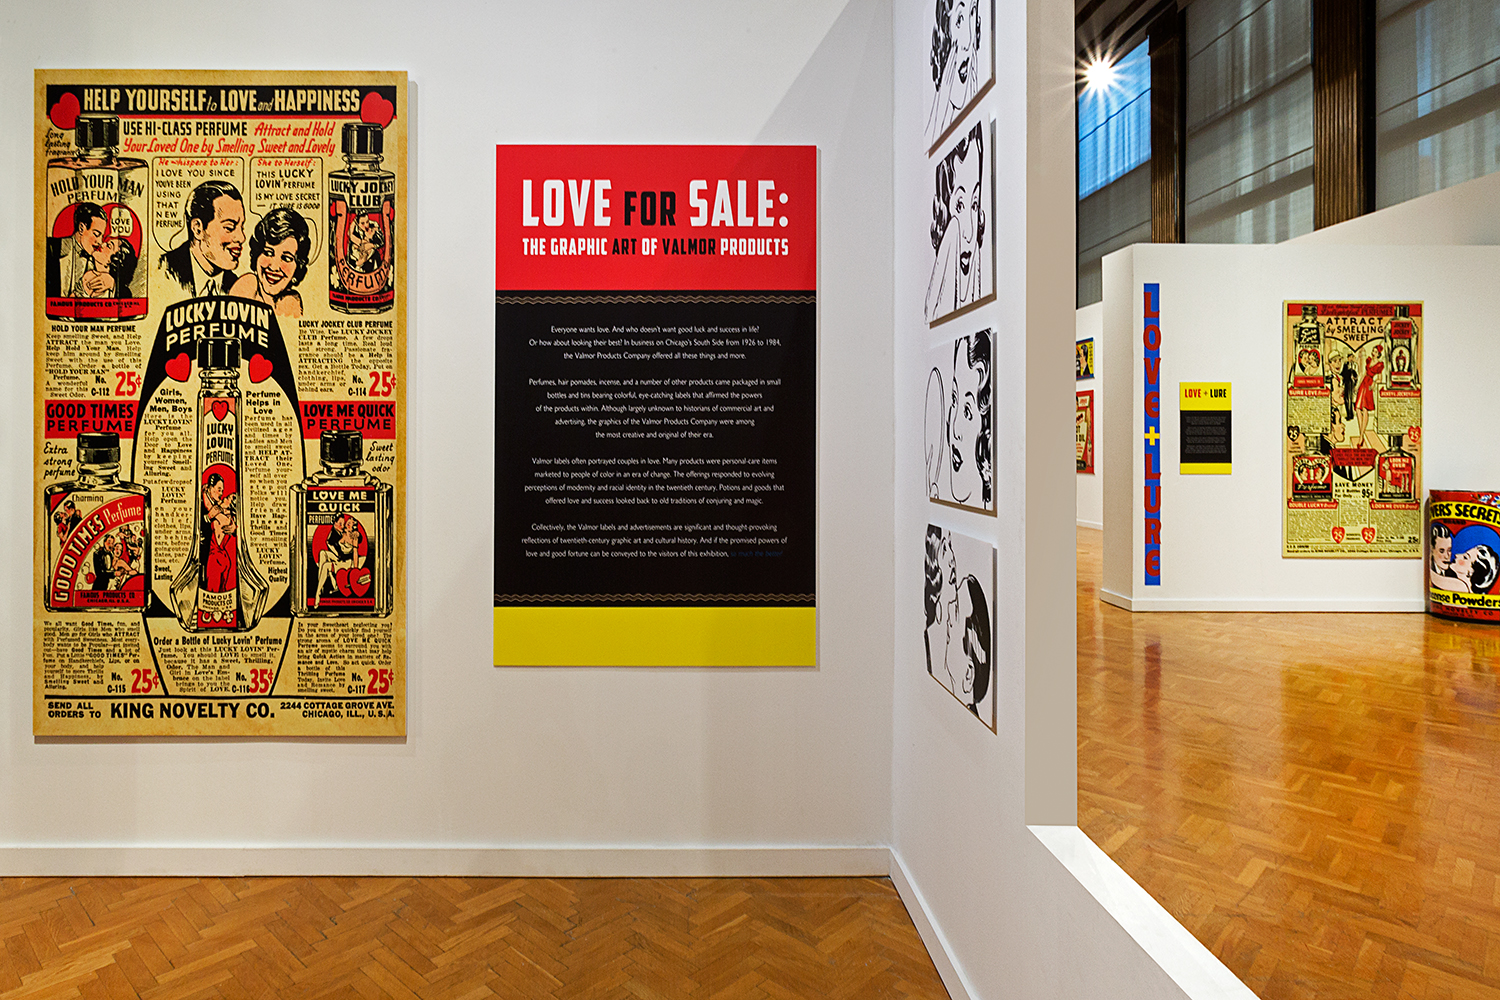 The Graphic Art of Valmor Products / Chicago Cultural Center / Chicago IL / Curator: Tim Samuelson / 2015